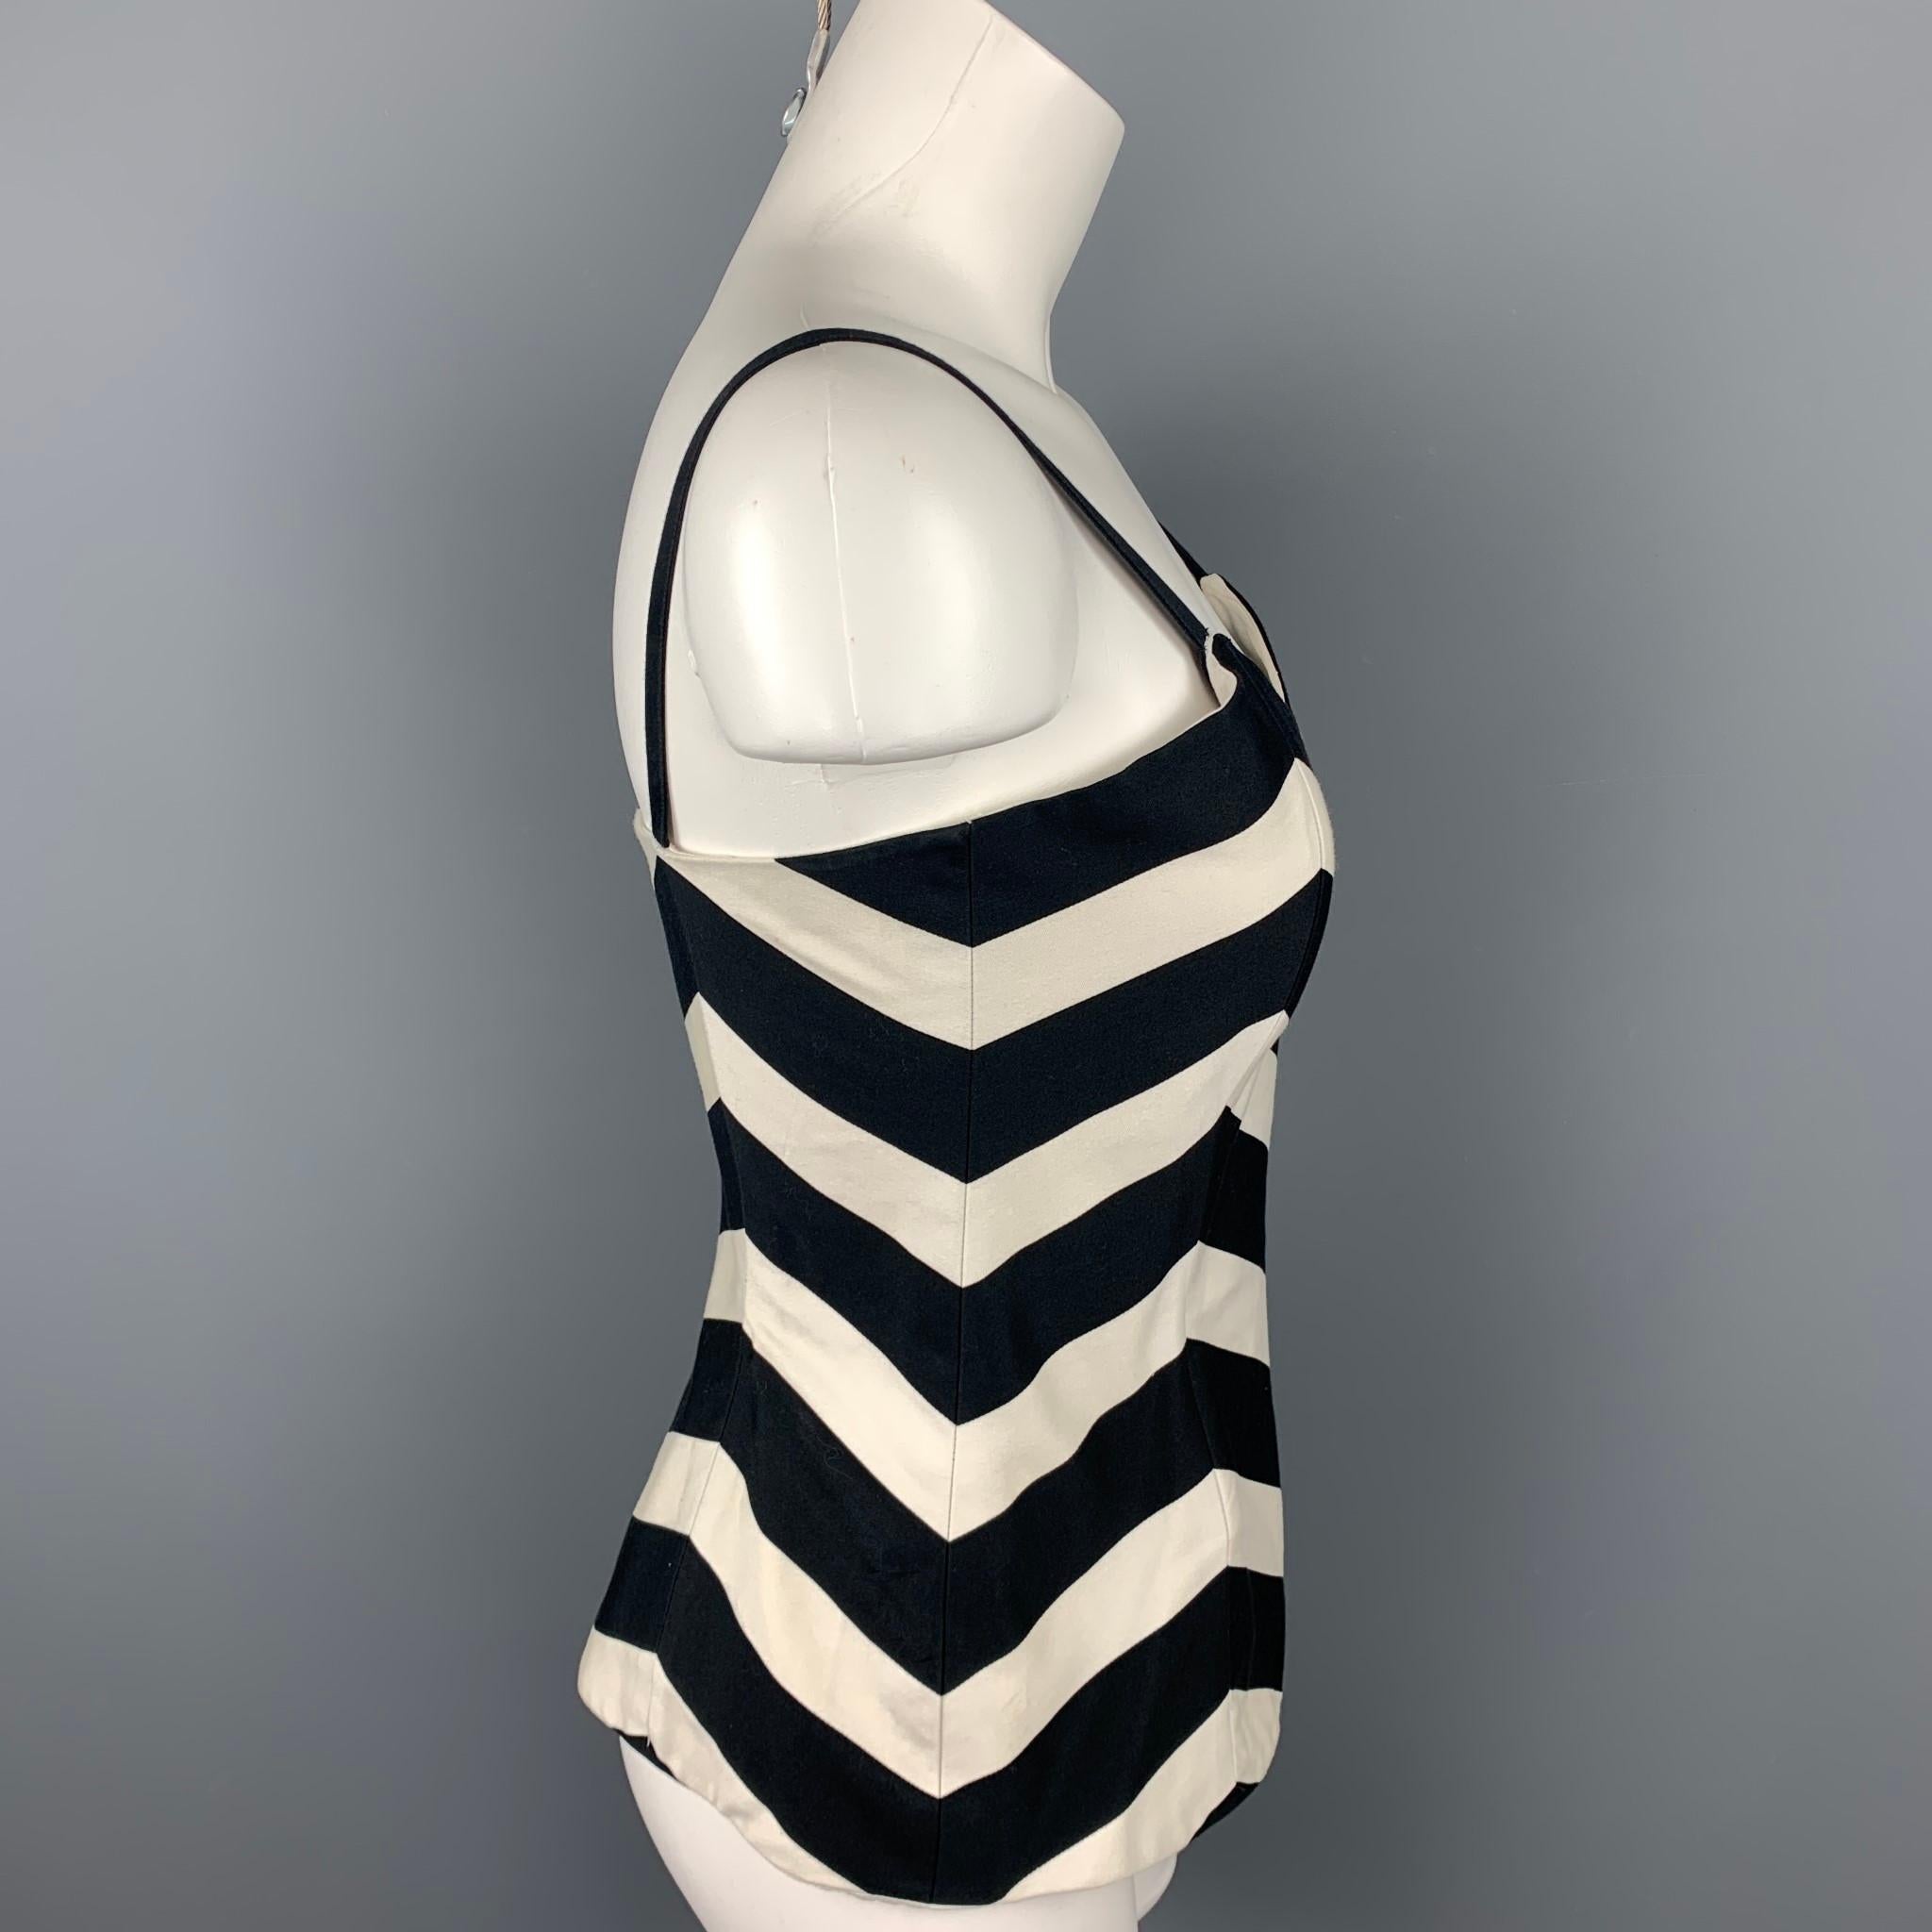 LOUIS FERAUD bustier comes in a black & white chevron print cotton featuring a fitted style, spaghetti straps, and a side zipper closure. Discoloration on the back. 

Fair Pre-Owned Condition.
Marked: D 38 / US 8 / UK 12 / F 40

Measurements:

Bust: